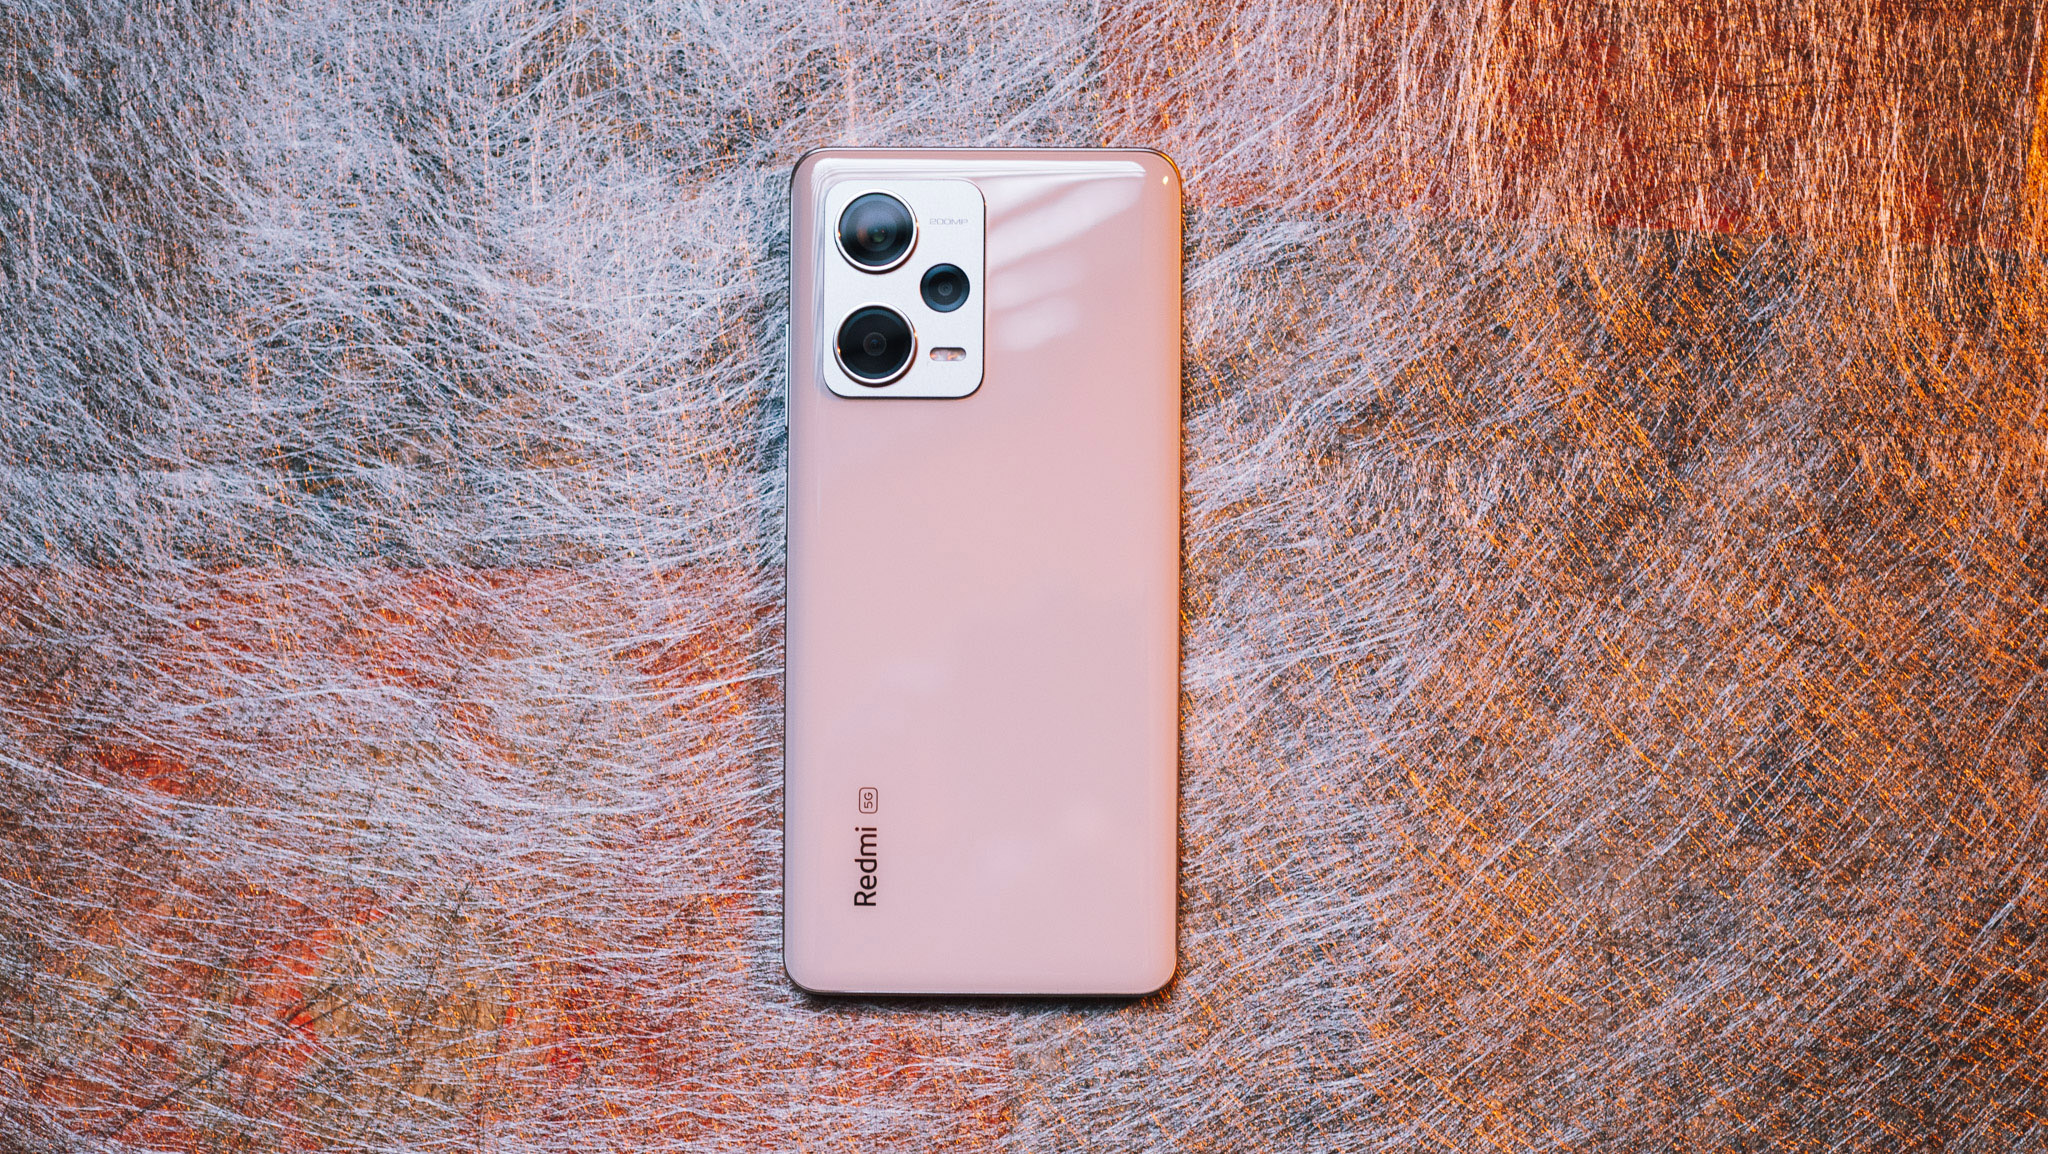 Xiaomi Redmi Note 12 Pro+ review: Camera, photo and video quality